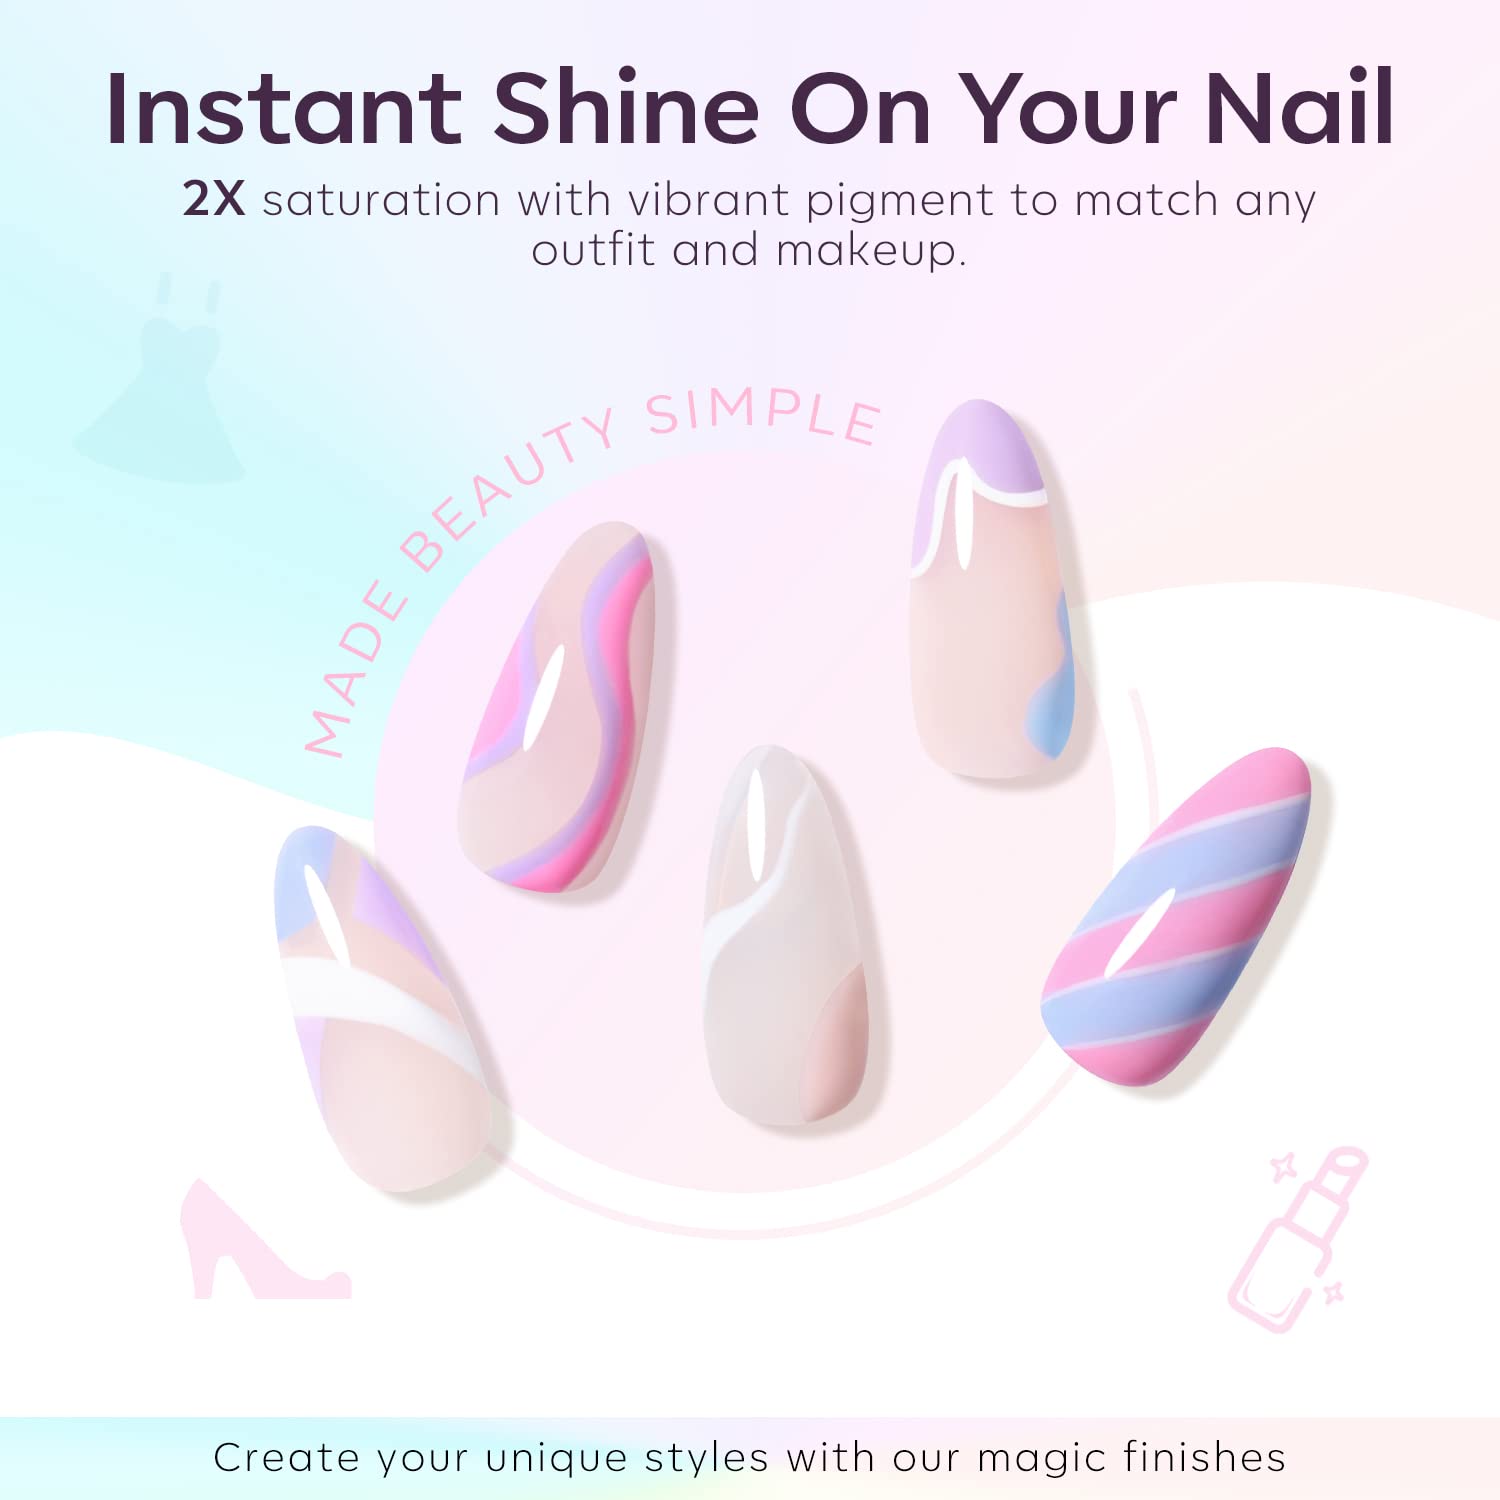 Buzzy Pastel - 6 Colors Gel Nail Polish Kit【US ONLY】